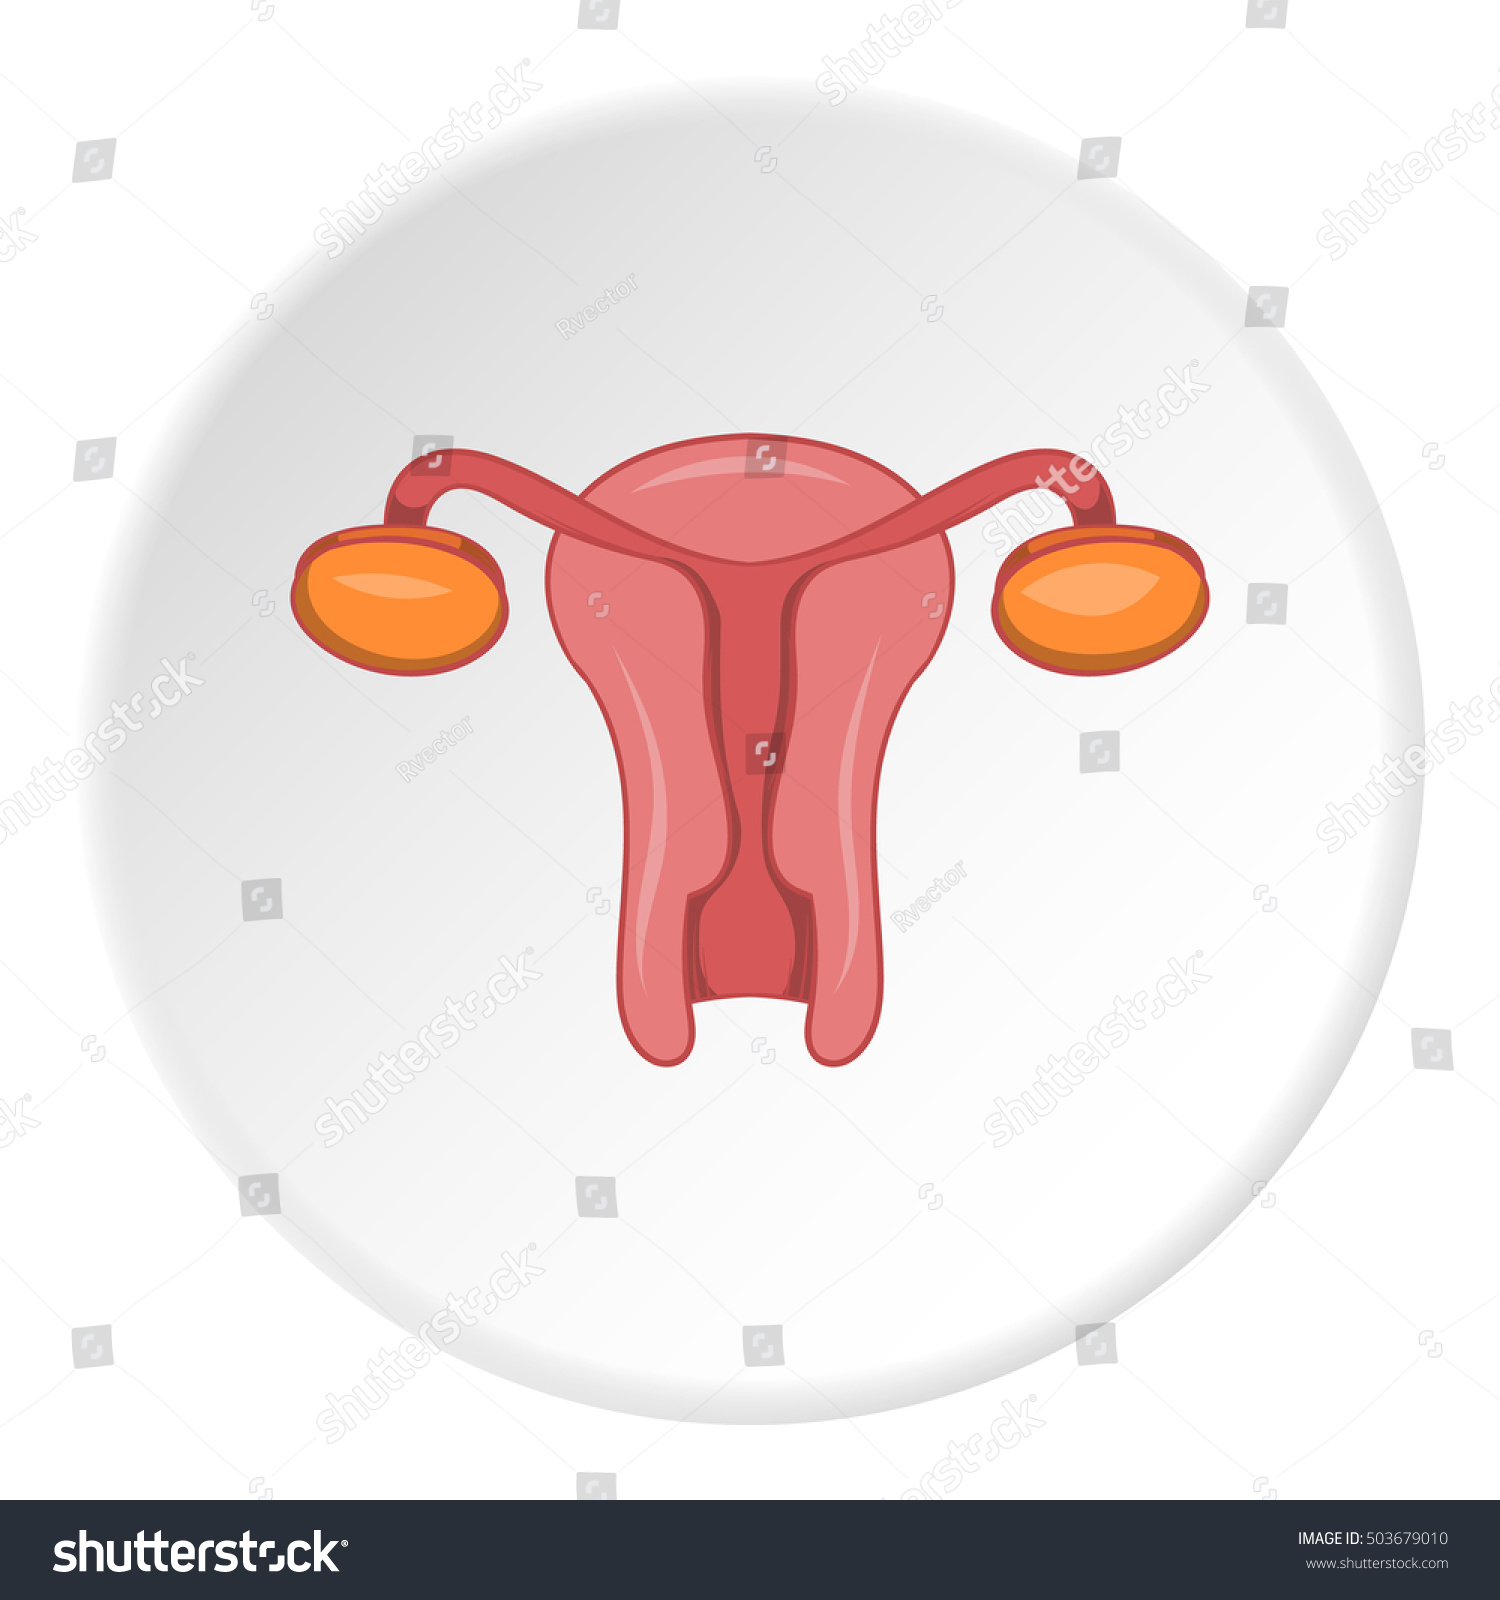 Female Sexual Organ Icon In Cartoon Style Isolated On White Circle